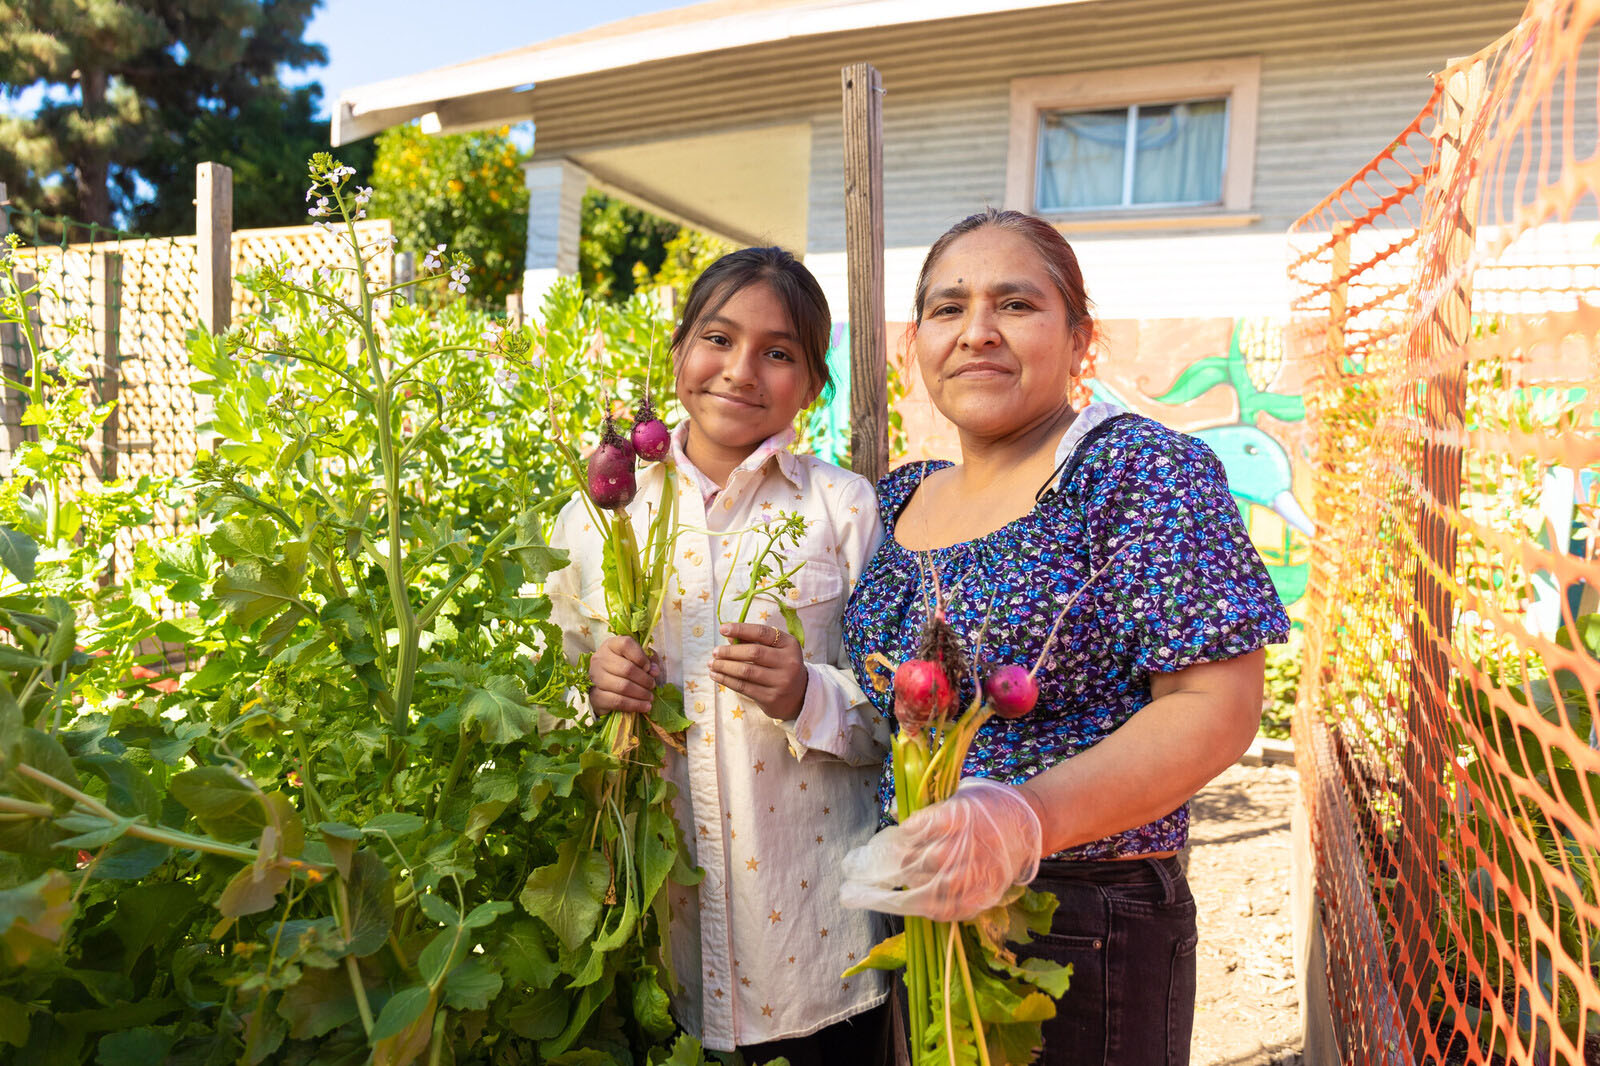 A woman and daughter standing in a garden holding radishes